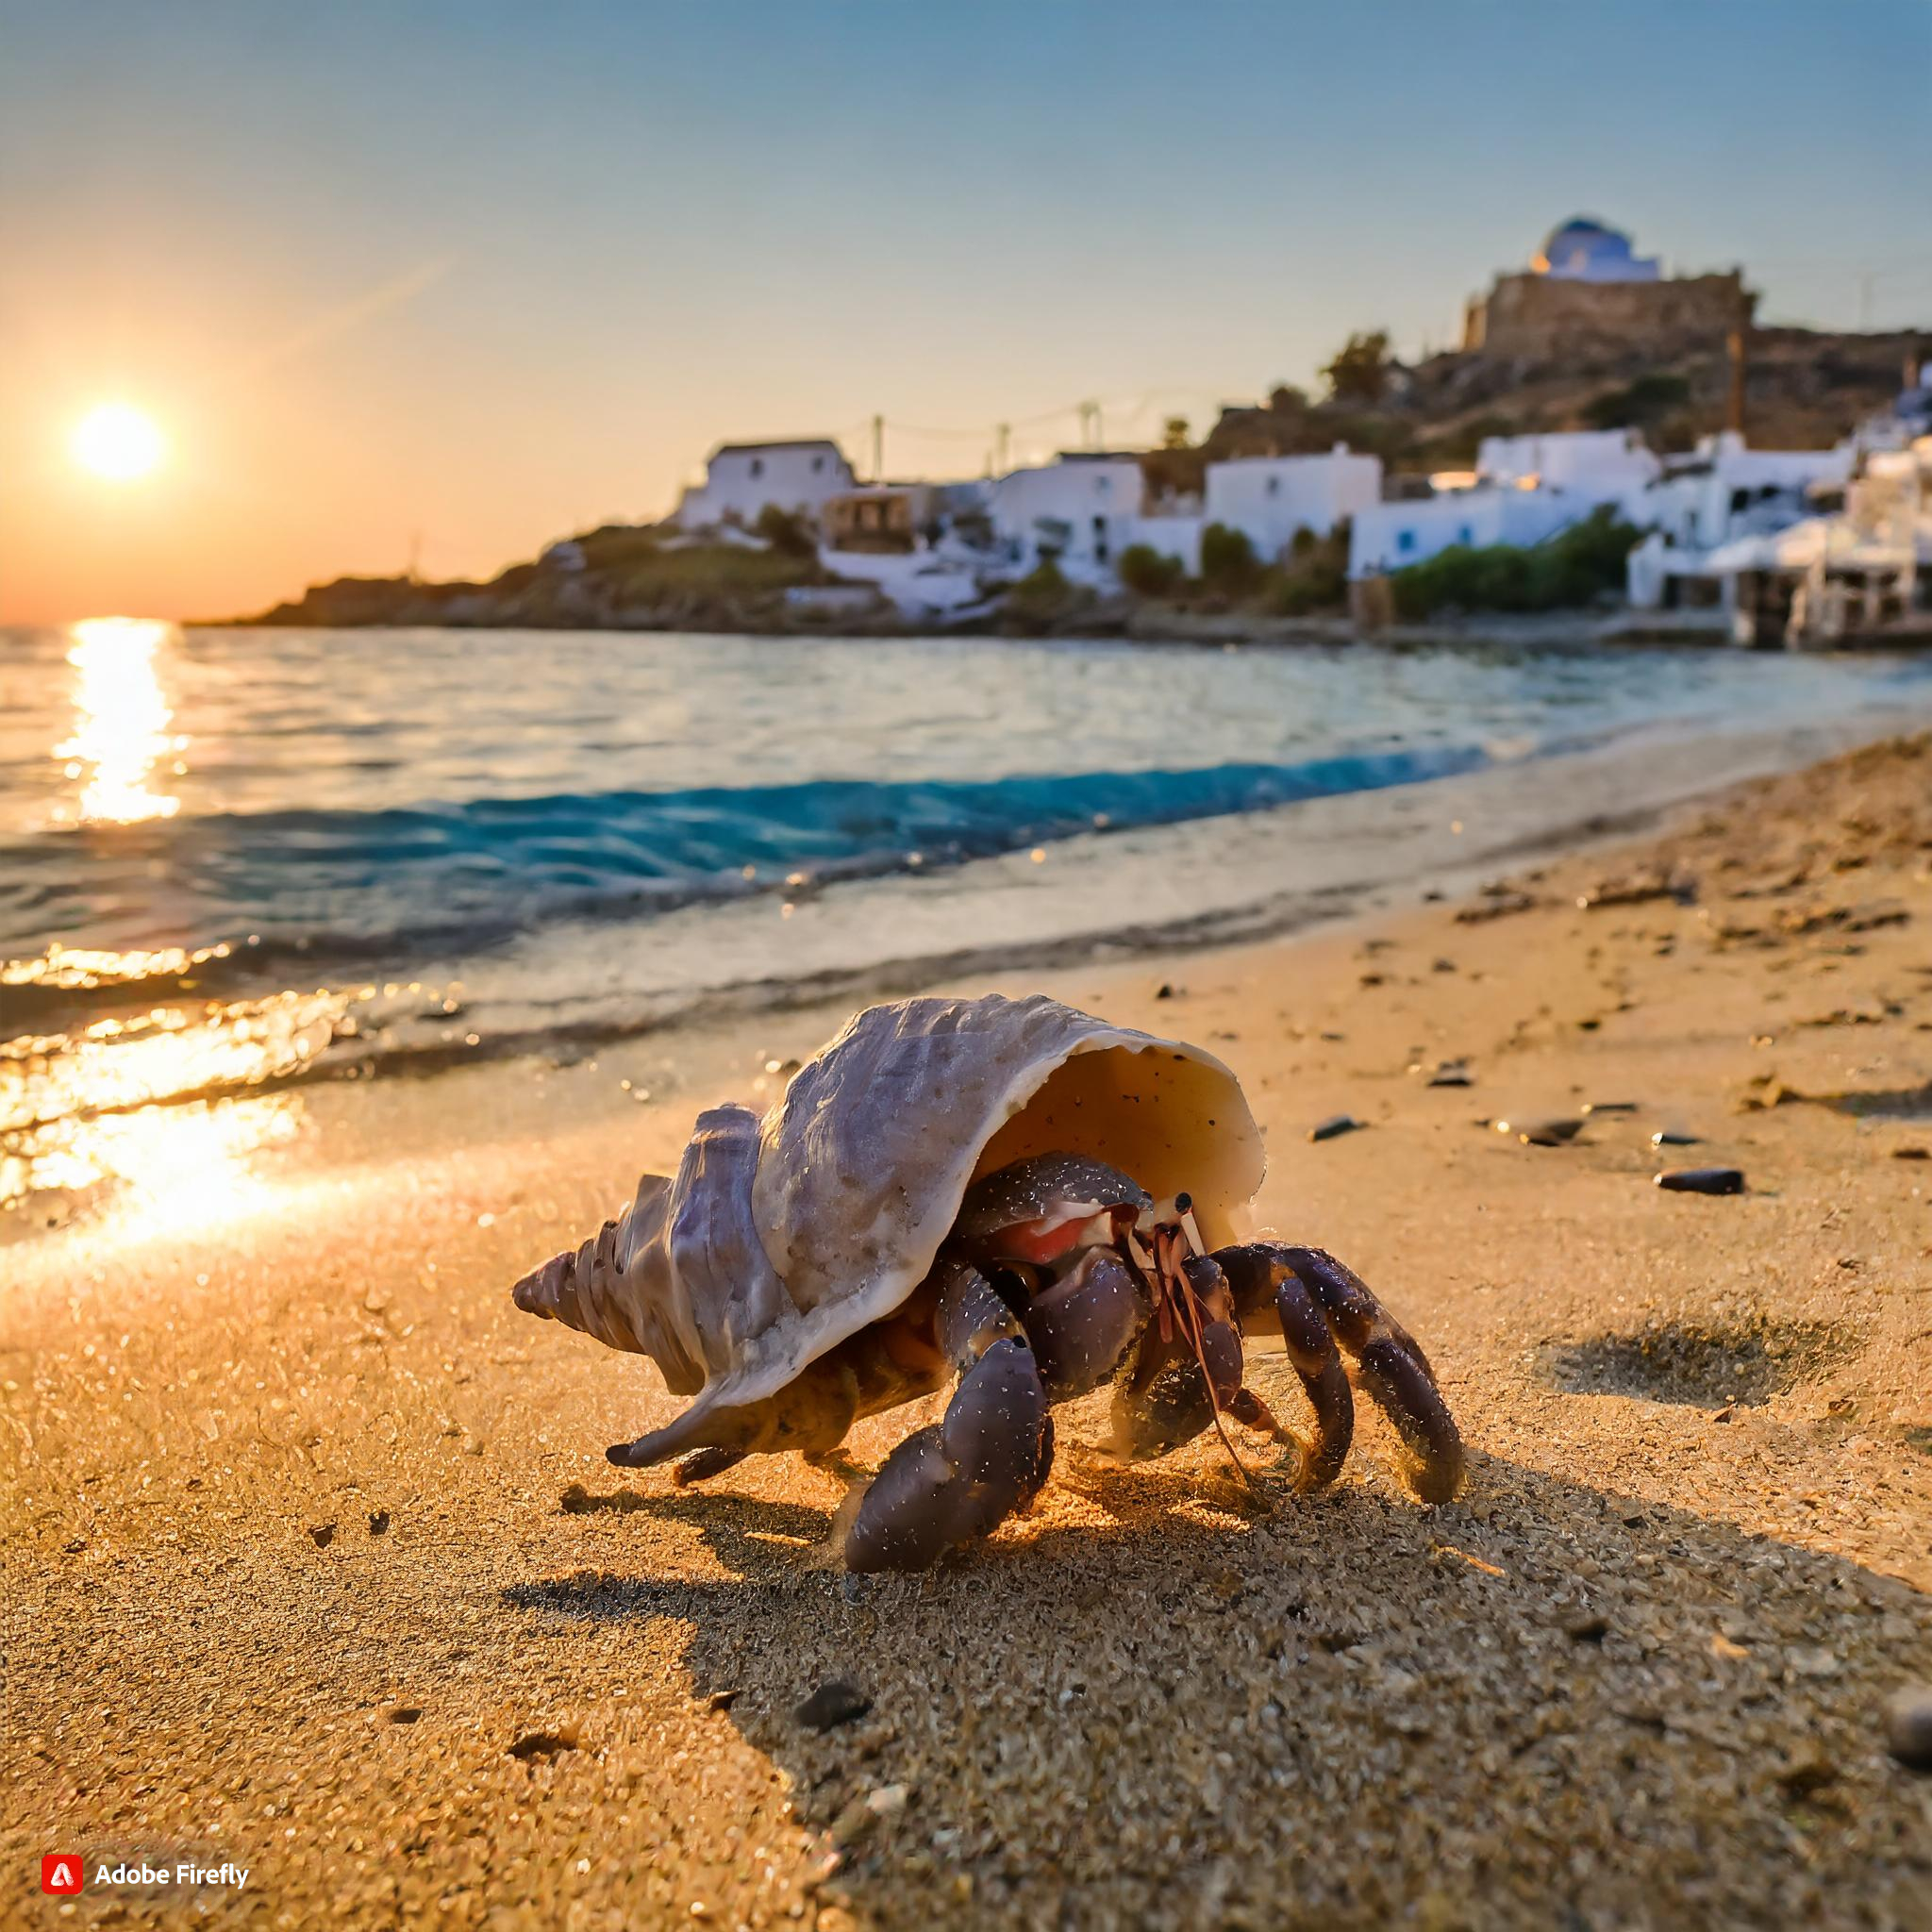  Firefly The beaches of greece photorealtic sun setting in the horizon a hermit crab on the sand, sho.jpg